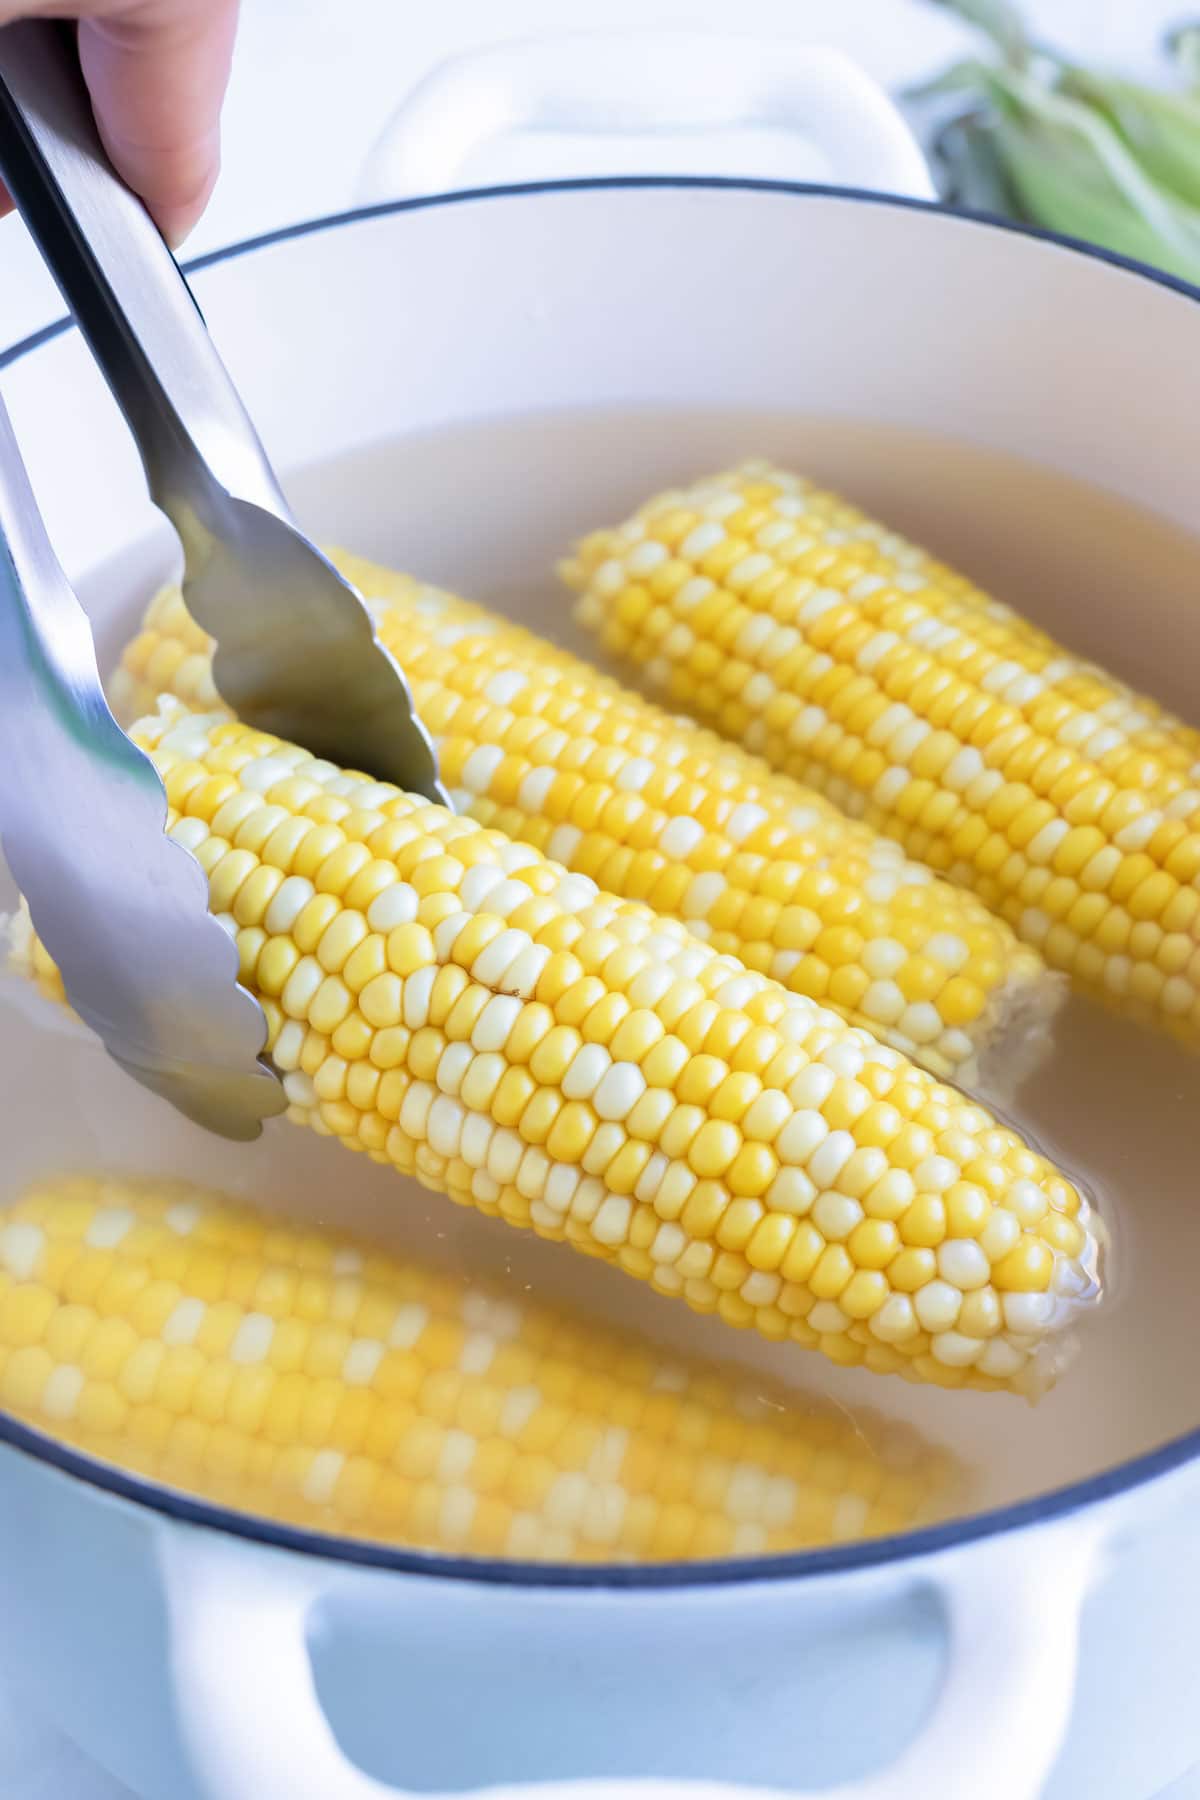 Corn is removed after being cooked in boiling water.